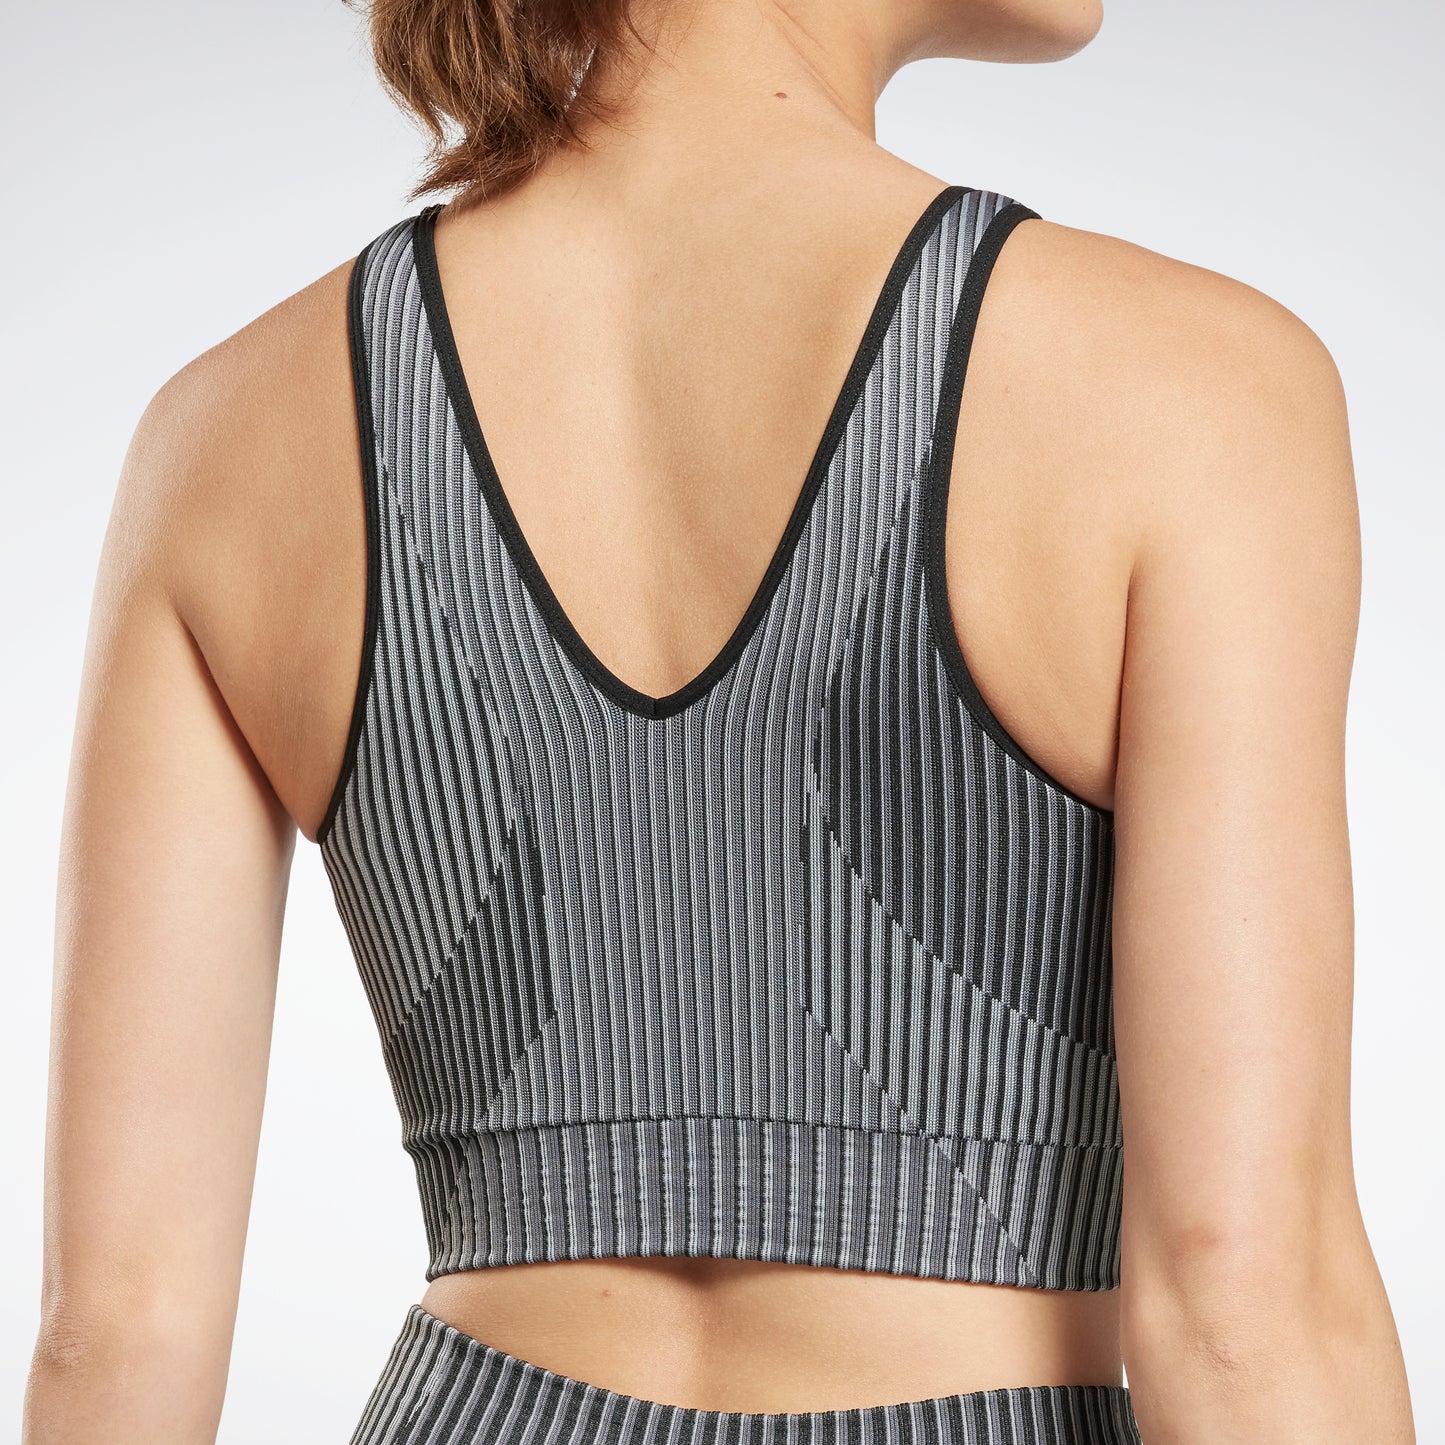 United By Fitness Myoknit Seamless Top Black